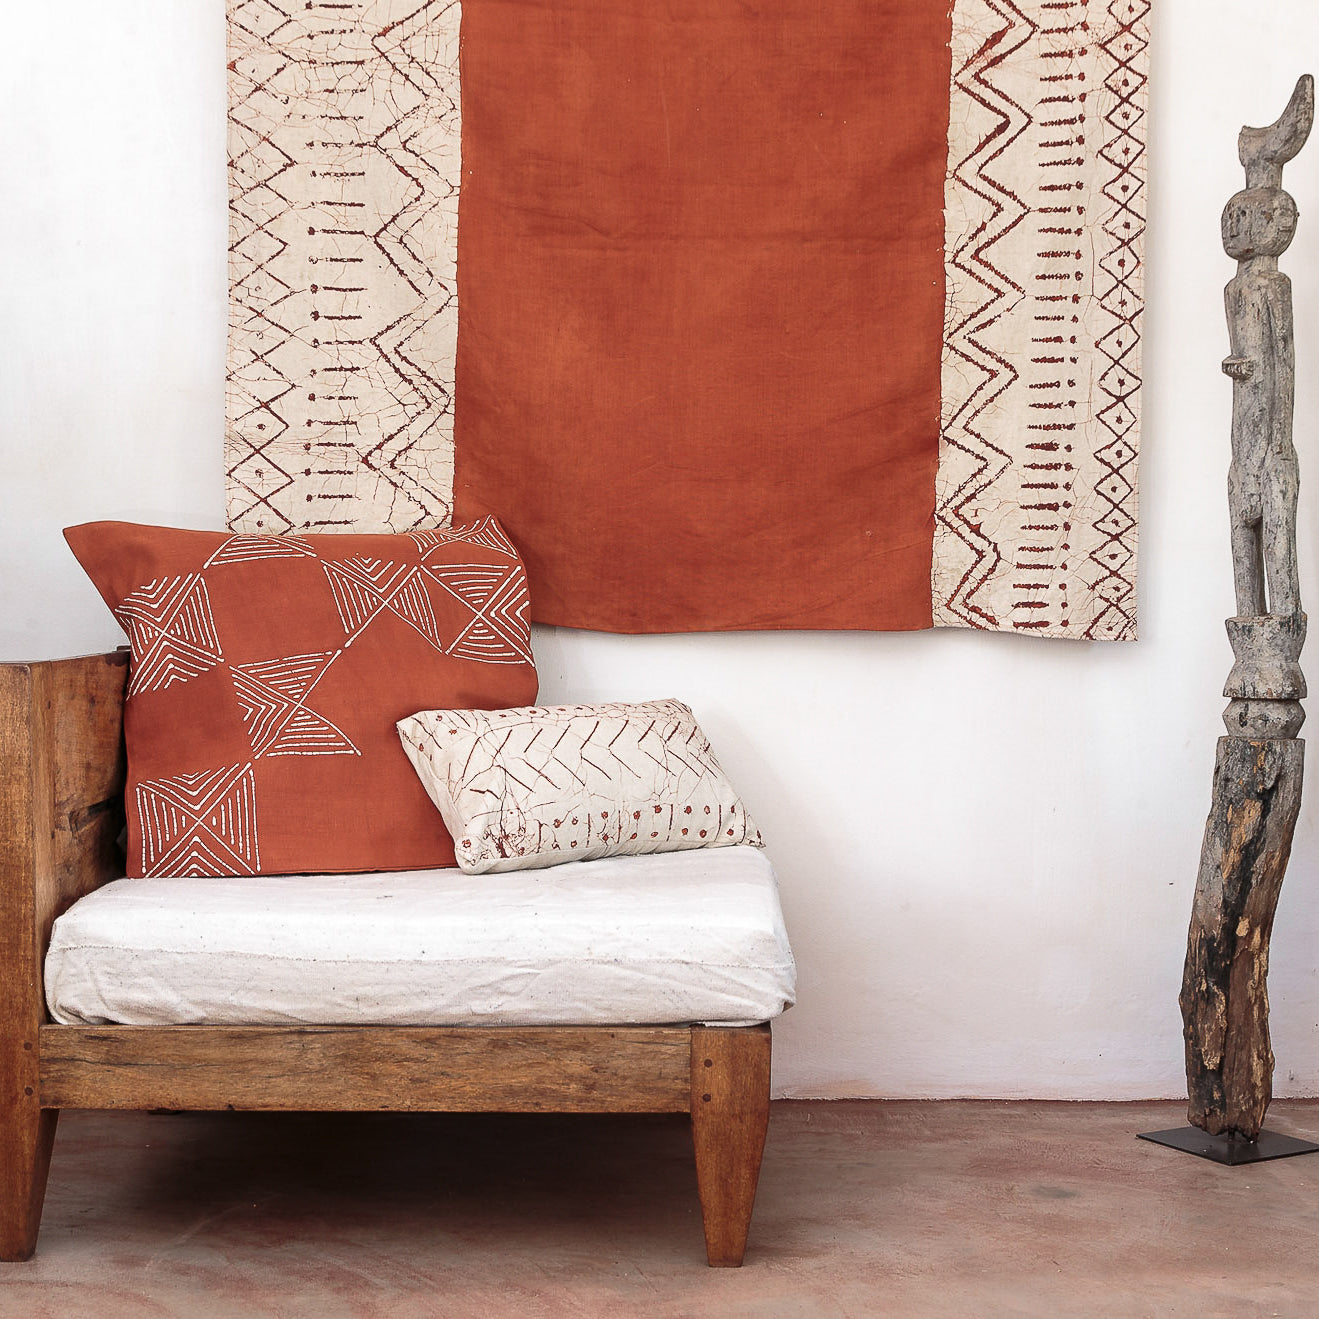 Zambia & France Cross Cultural Collaboration, Tribal Textiles, Hand-Painted Textiles